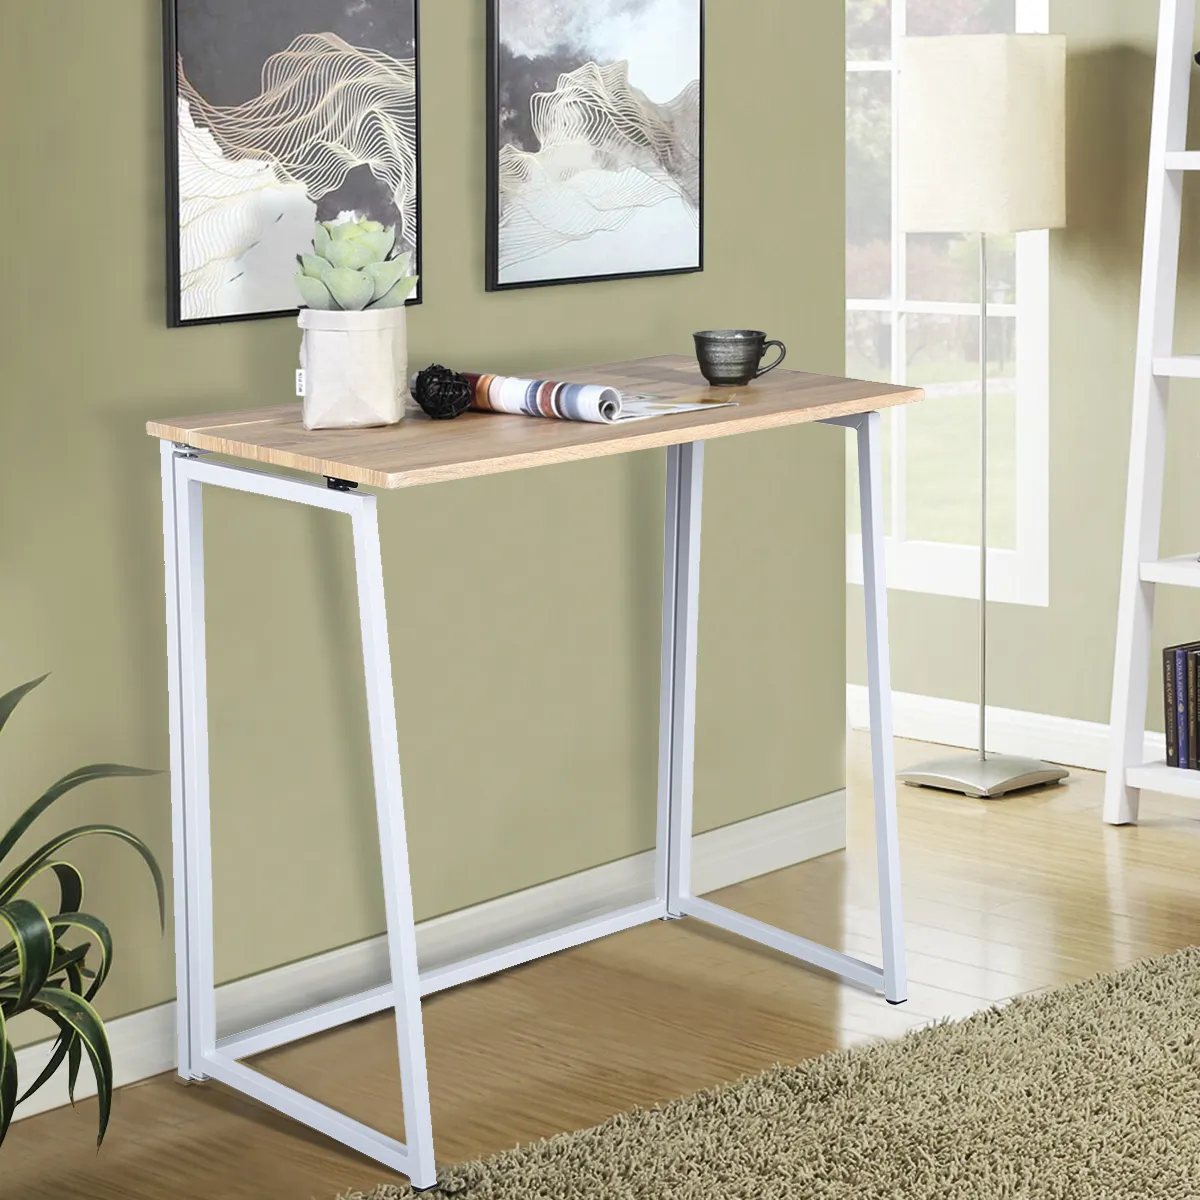 Modern Industrial Style Small Computer Desk Space Saving Folding Study Desk Table for Writing Small Spaces Home Office Use